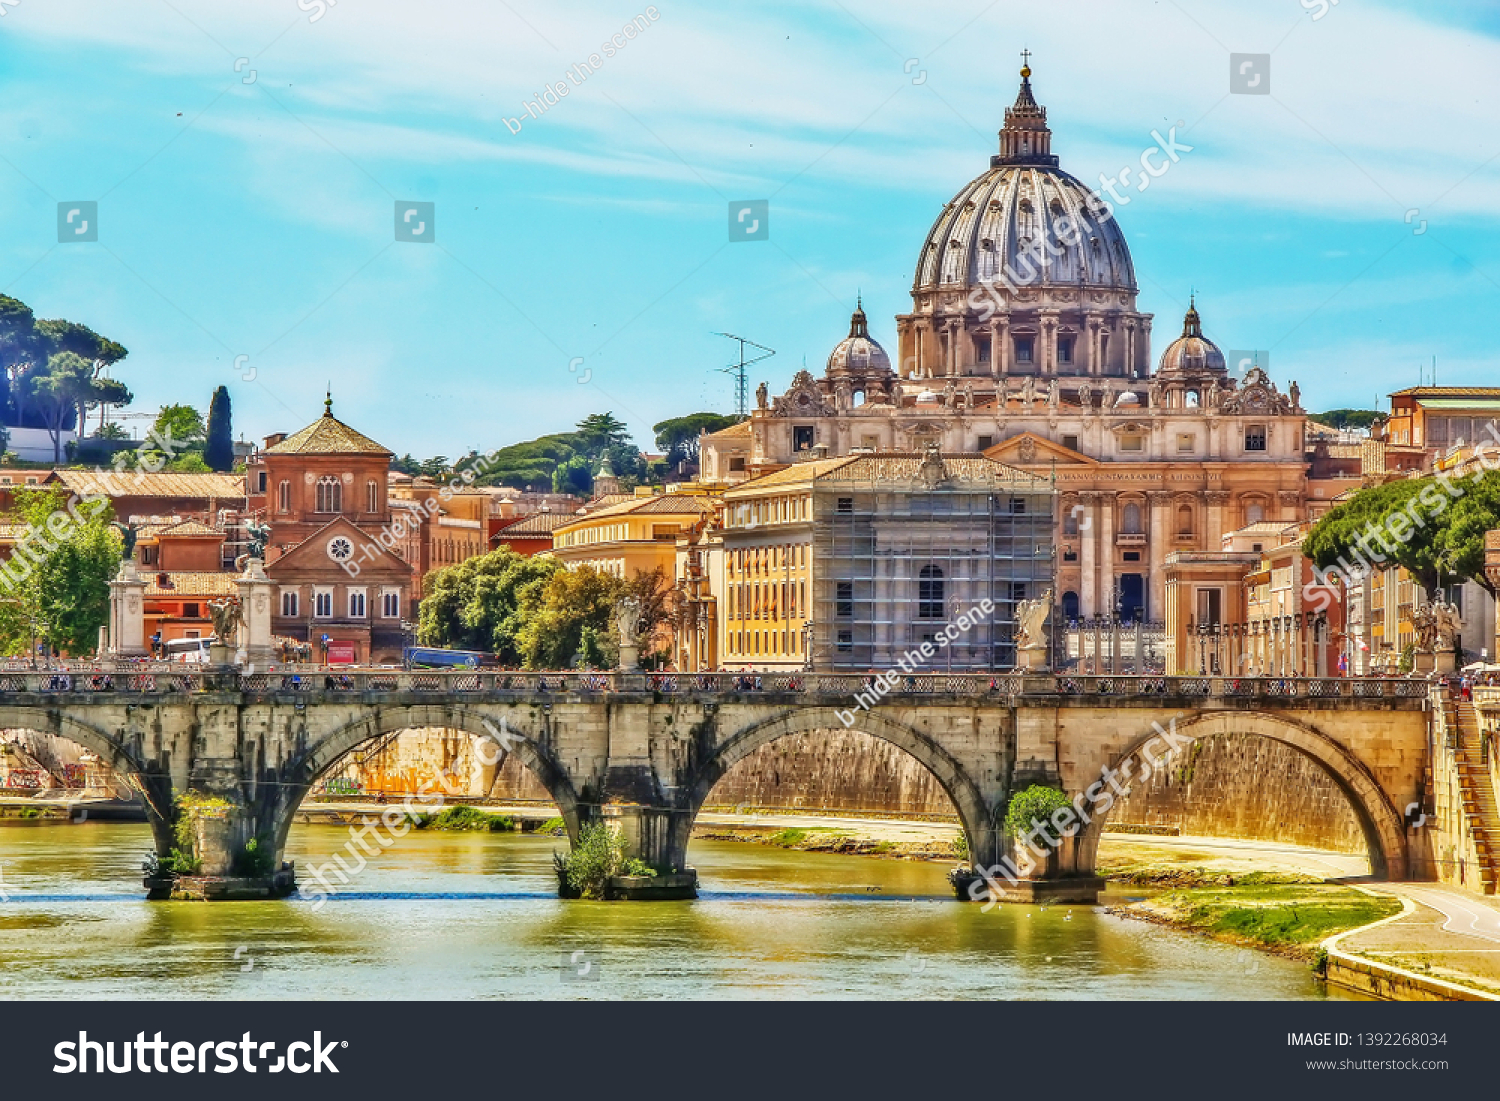 The Papal Basilica of St. Peter in the Vatican (St. Peter's Basilica), an Italian Renaissance church in Vatican City, the papal enclave within city of Rome, view from Tiber river on Ponte Sant'Angelo #1392268034